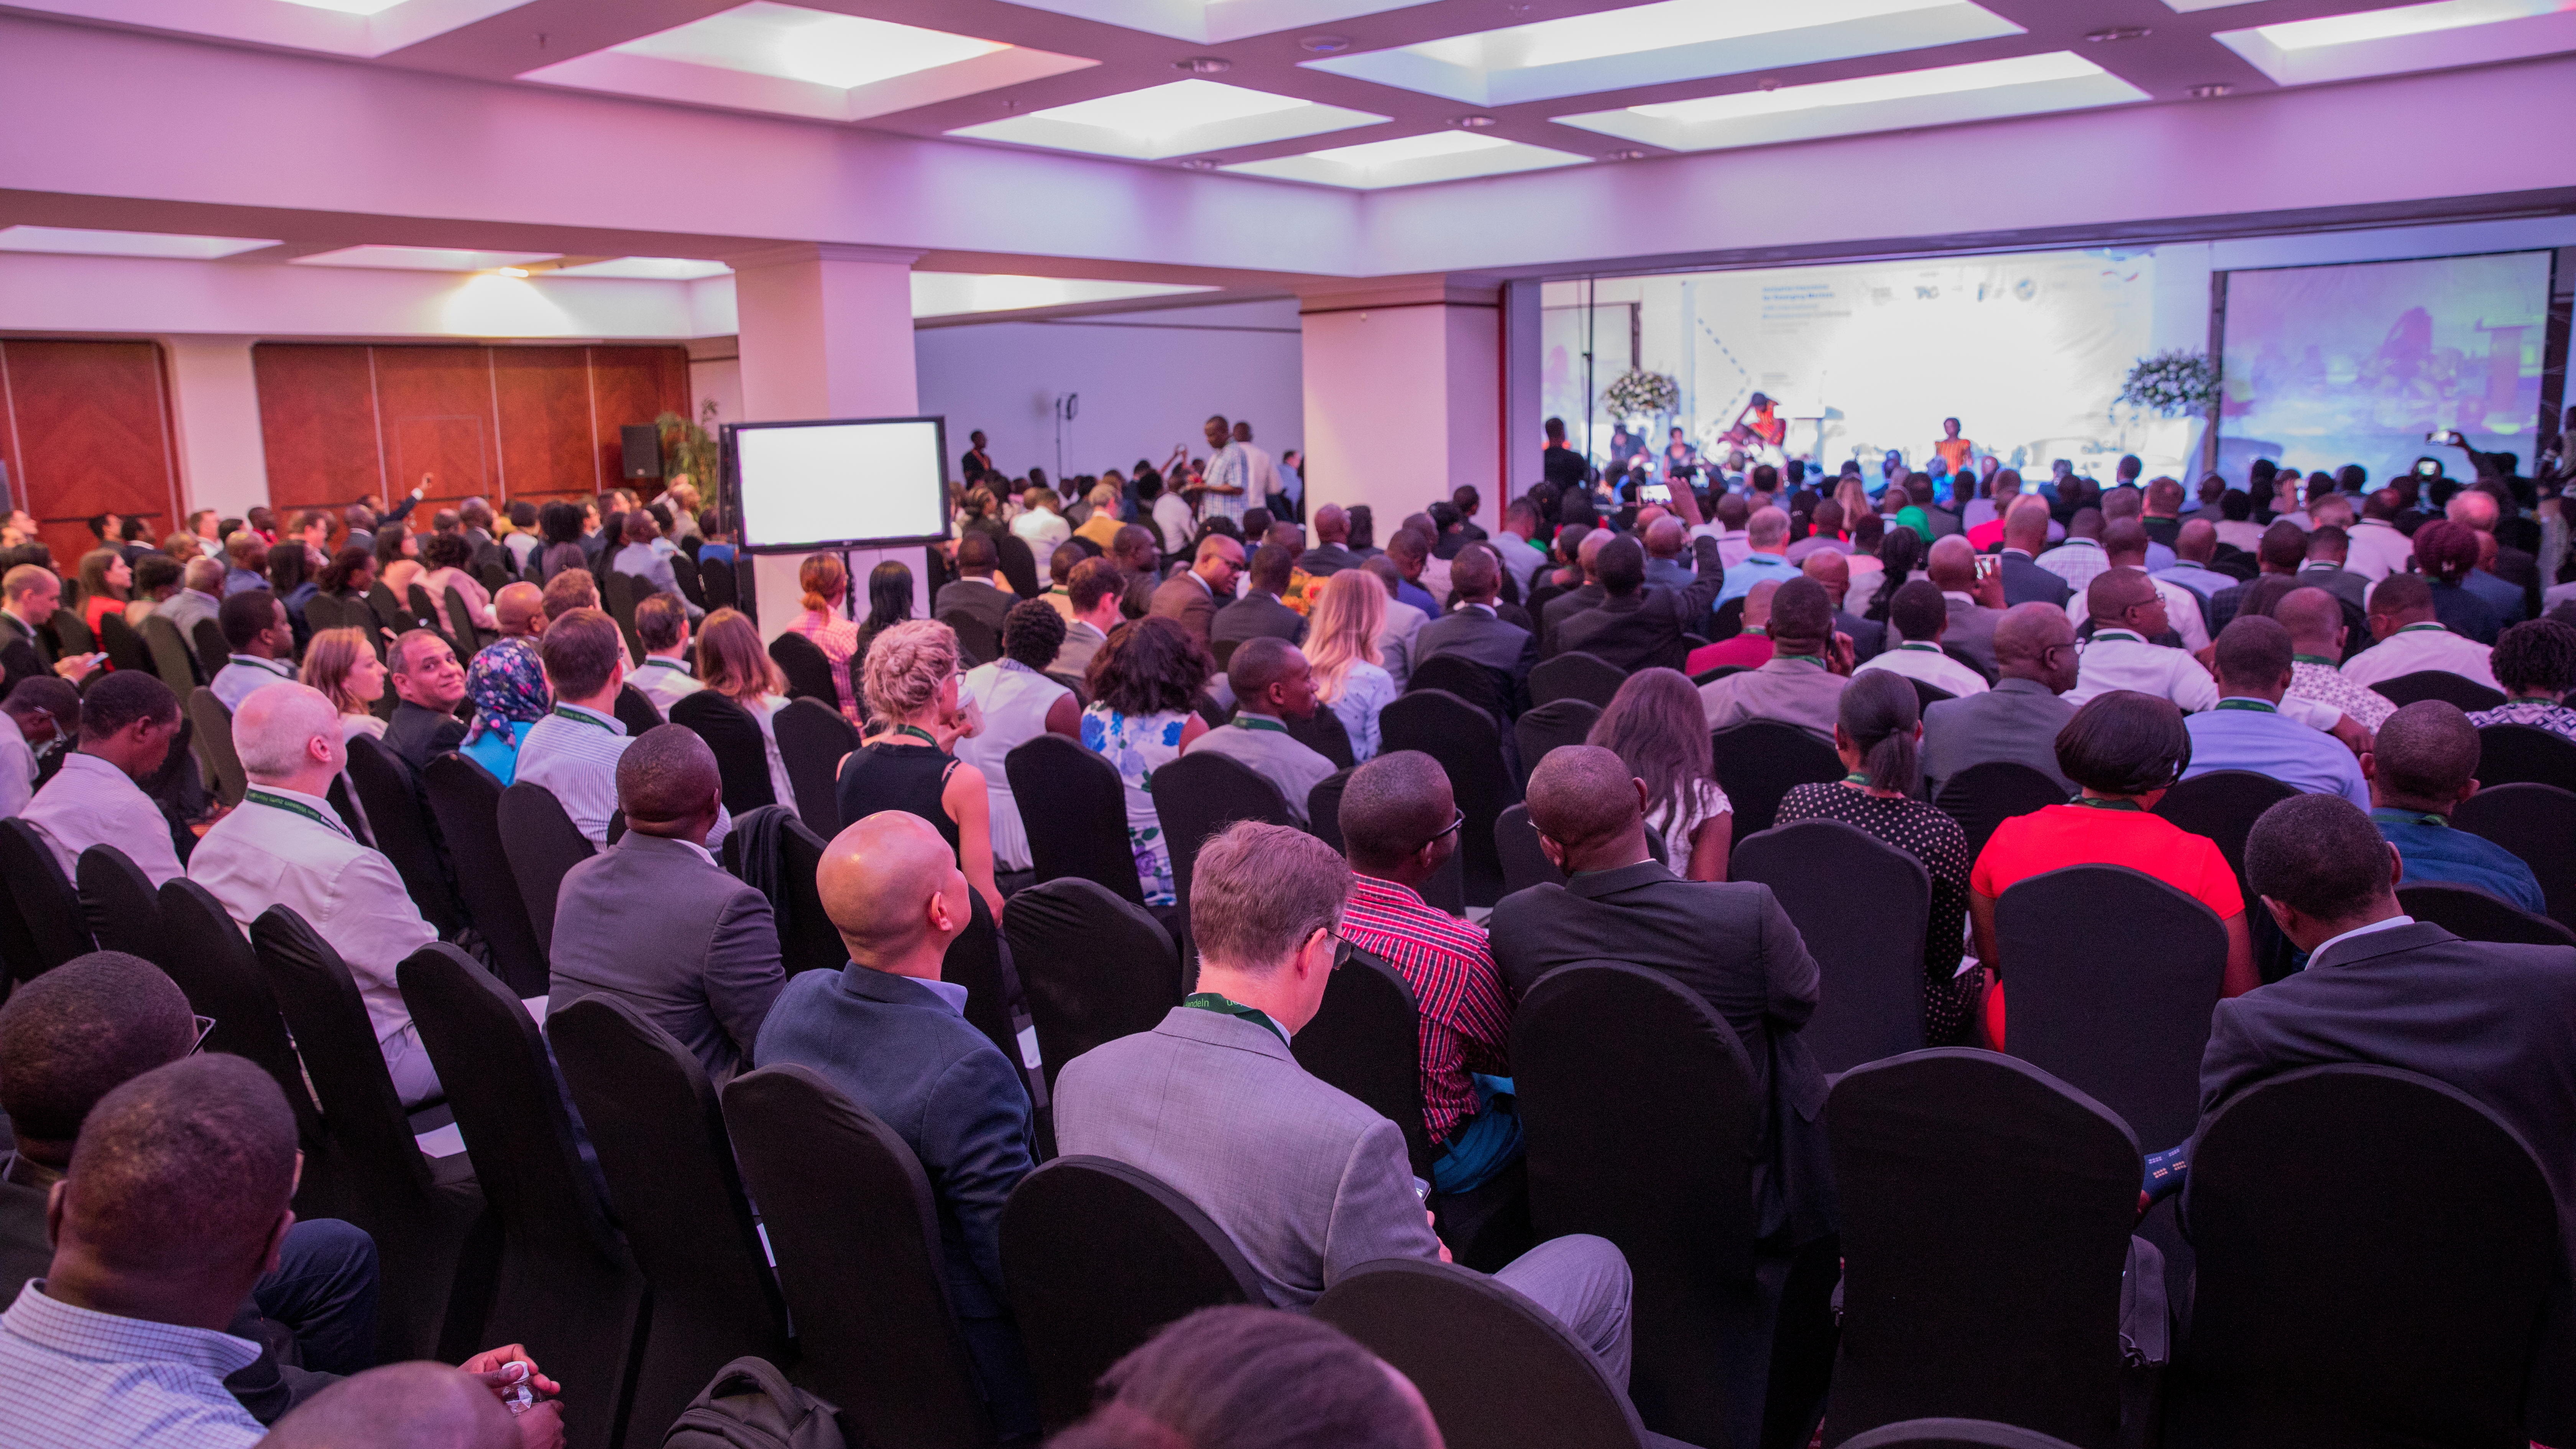  Around 450 participants from 57 countries attended the 14th IMC in Zambia.